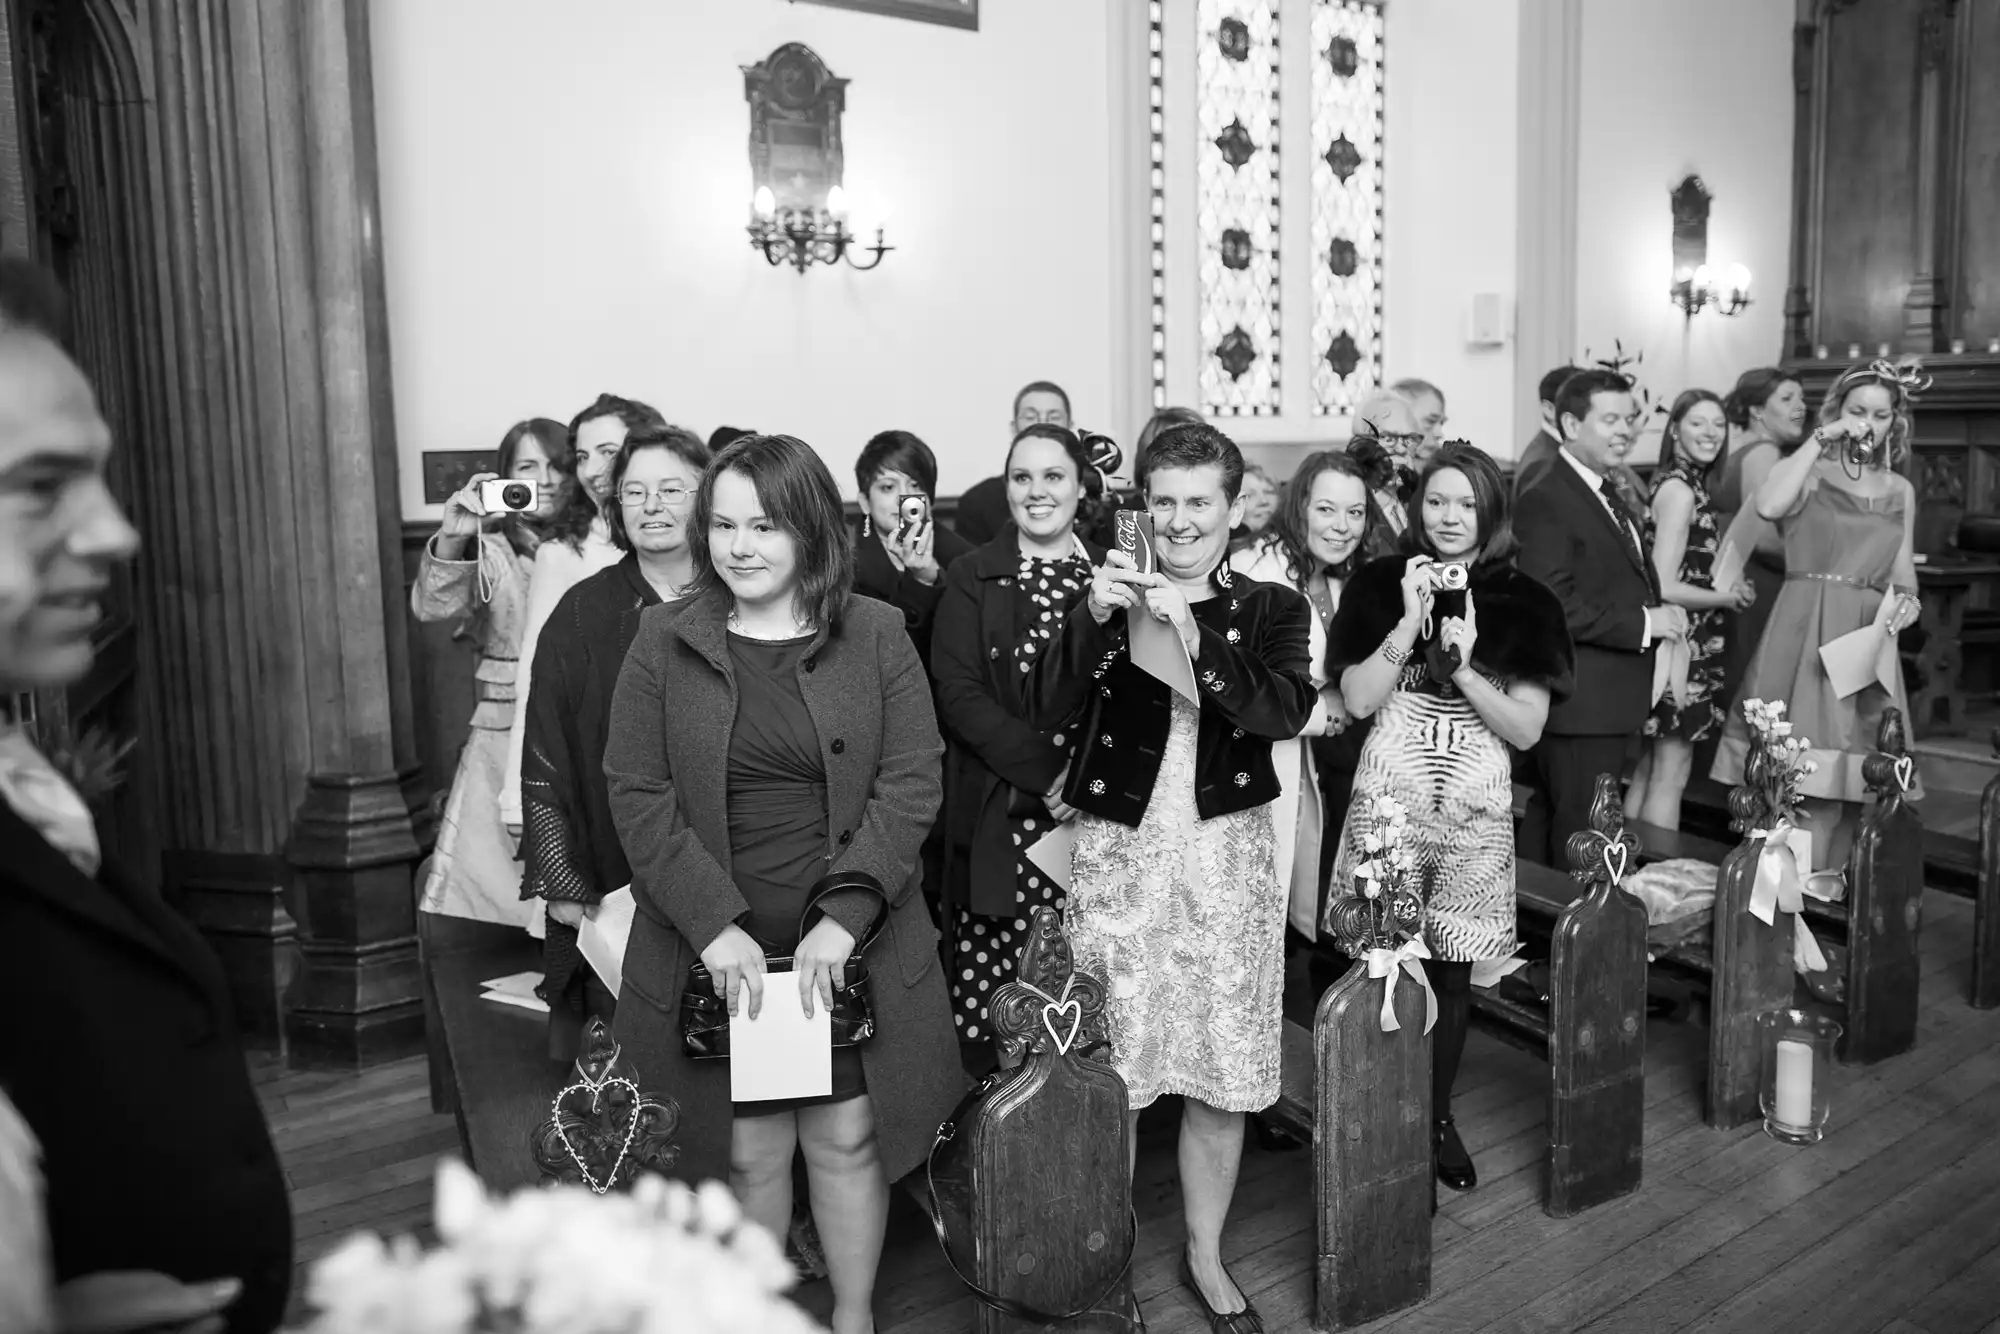 Guests smiling and clapping at a wedding ceremony inside a church hall, some holding cameras, captured in black and white.